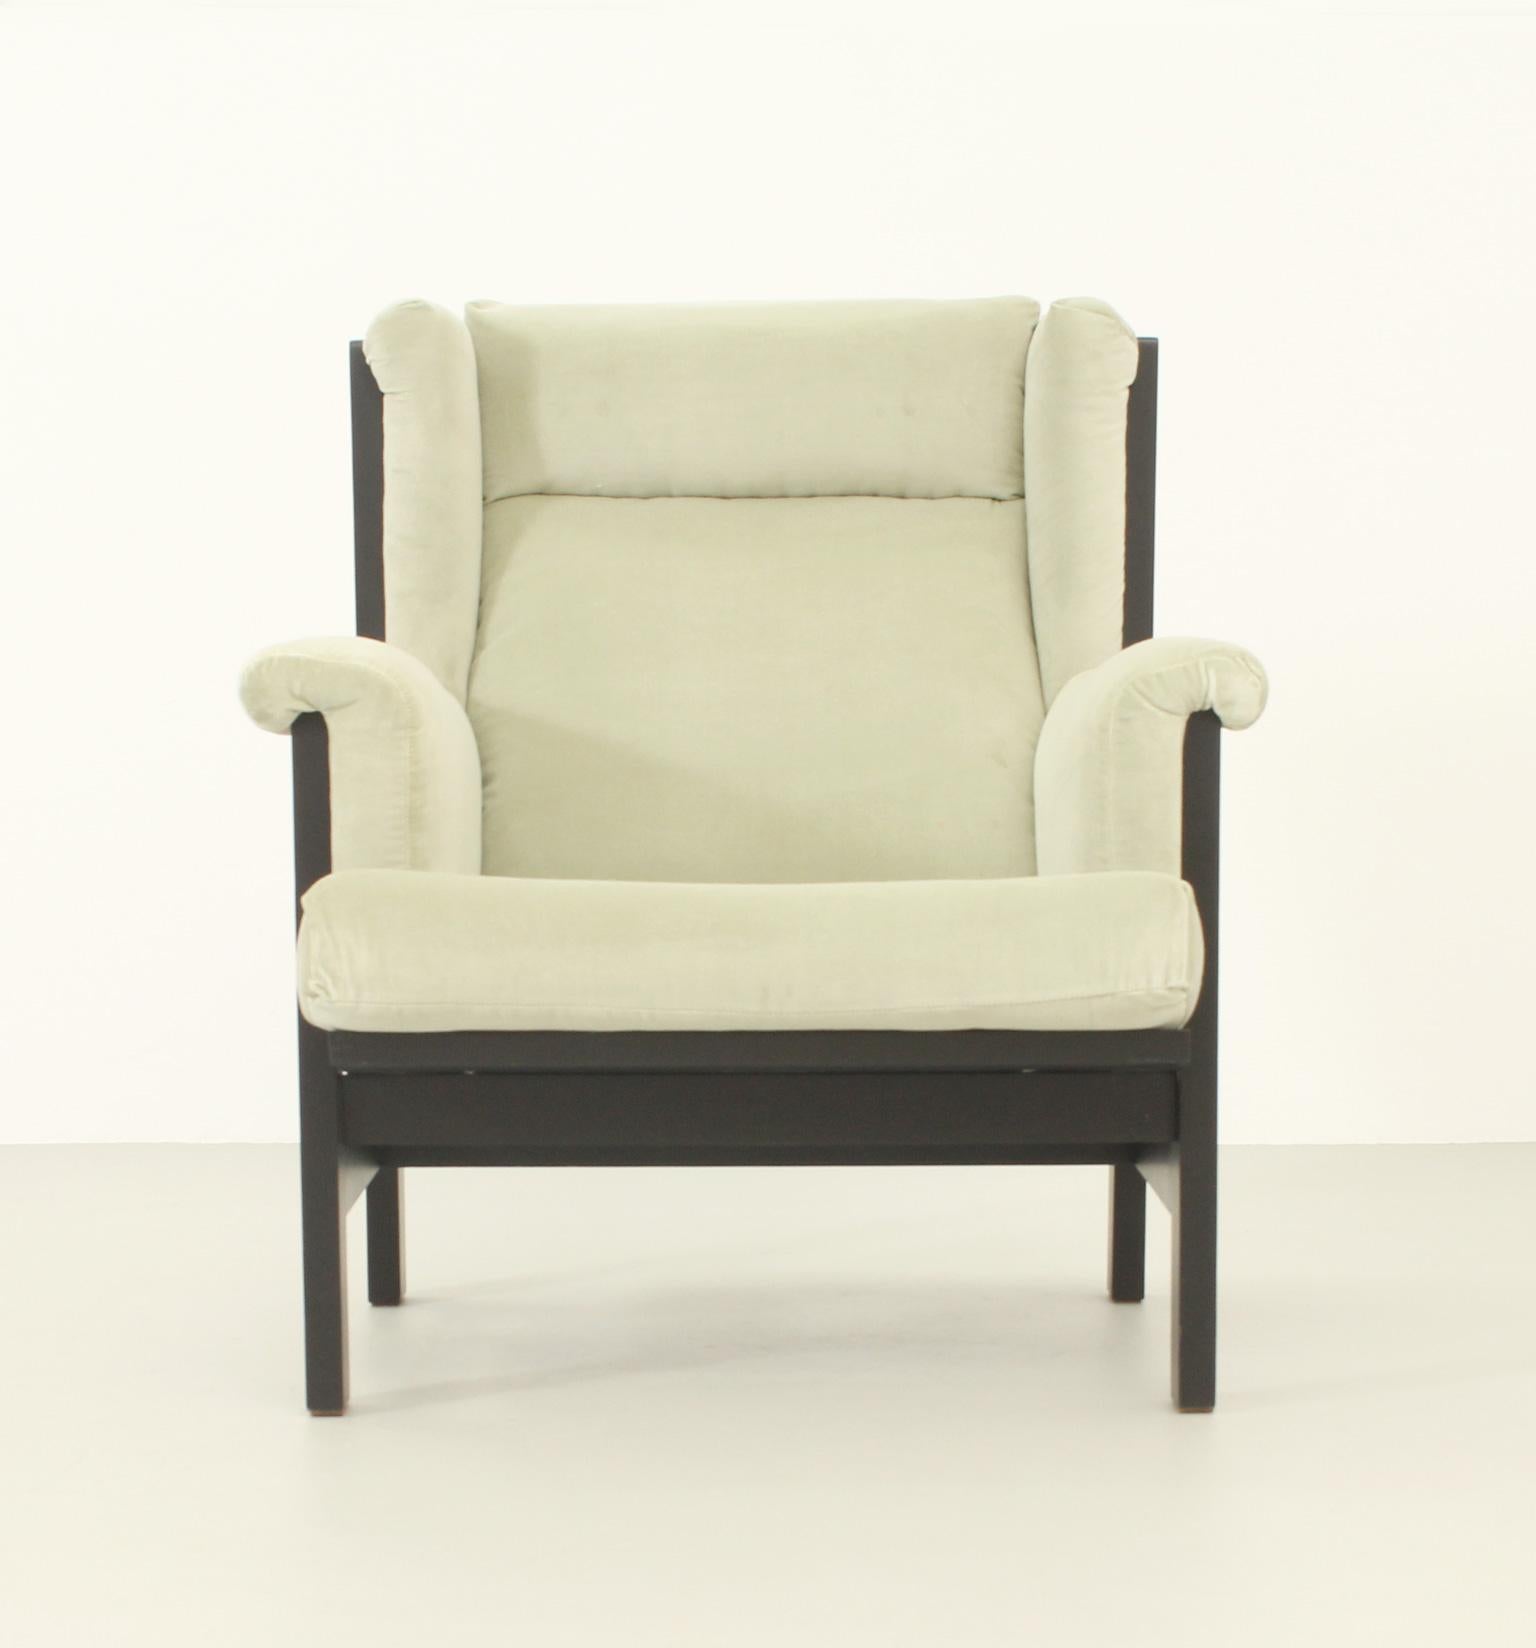 San Remo Armchair By Rafael Carreras, Spain, 1959 For Sale 3